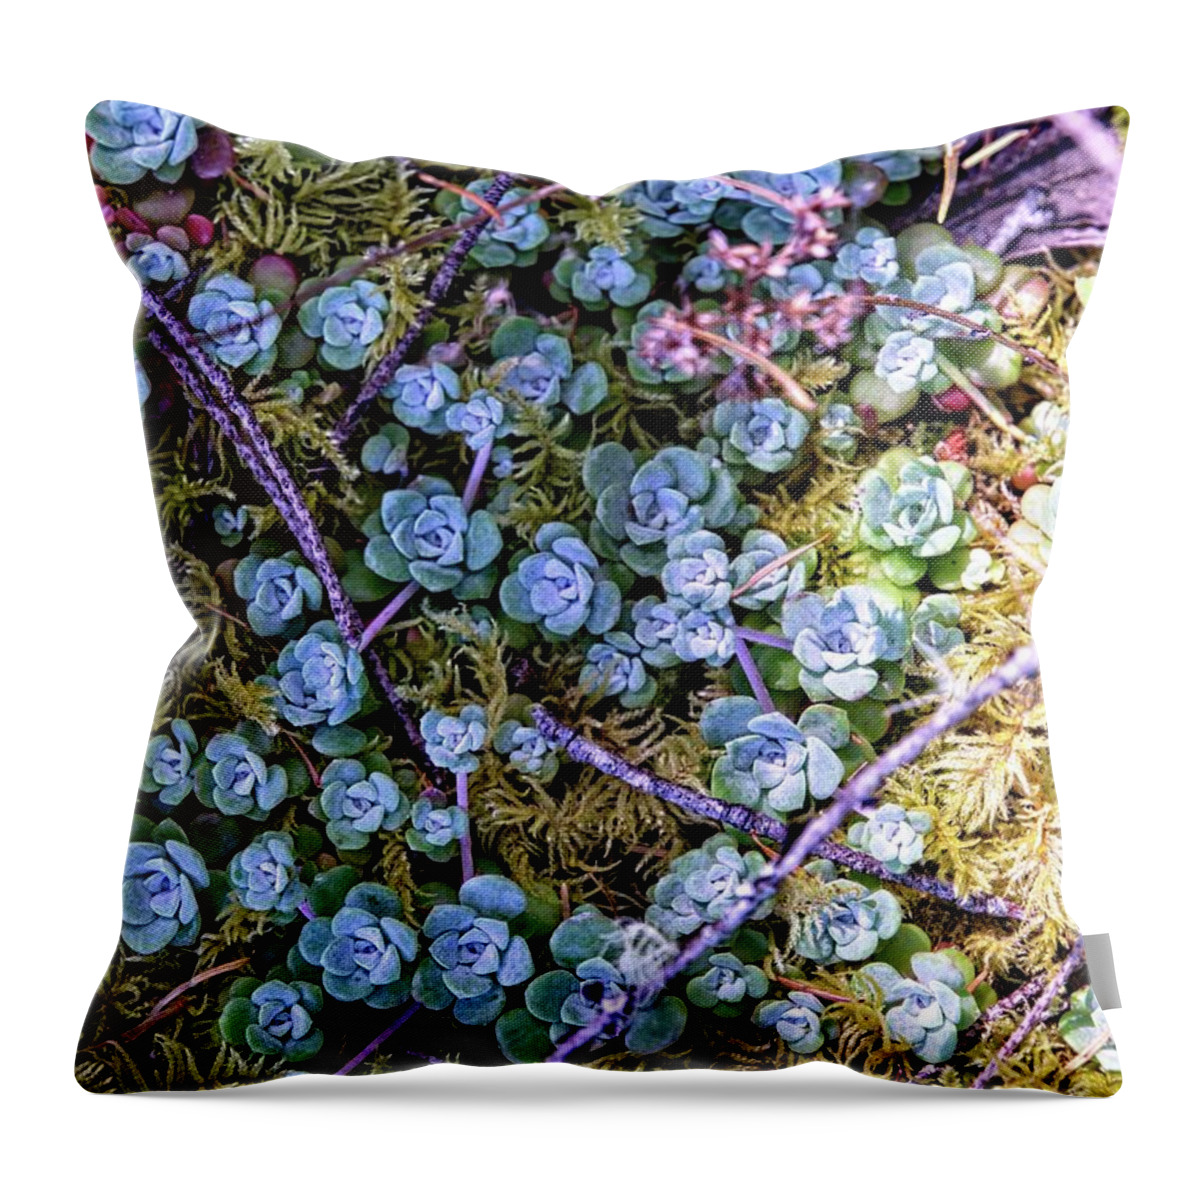 Background Throw Pillow featuring the photograph Colorful Forest Floor by David Desautel